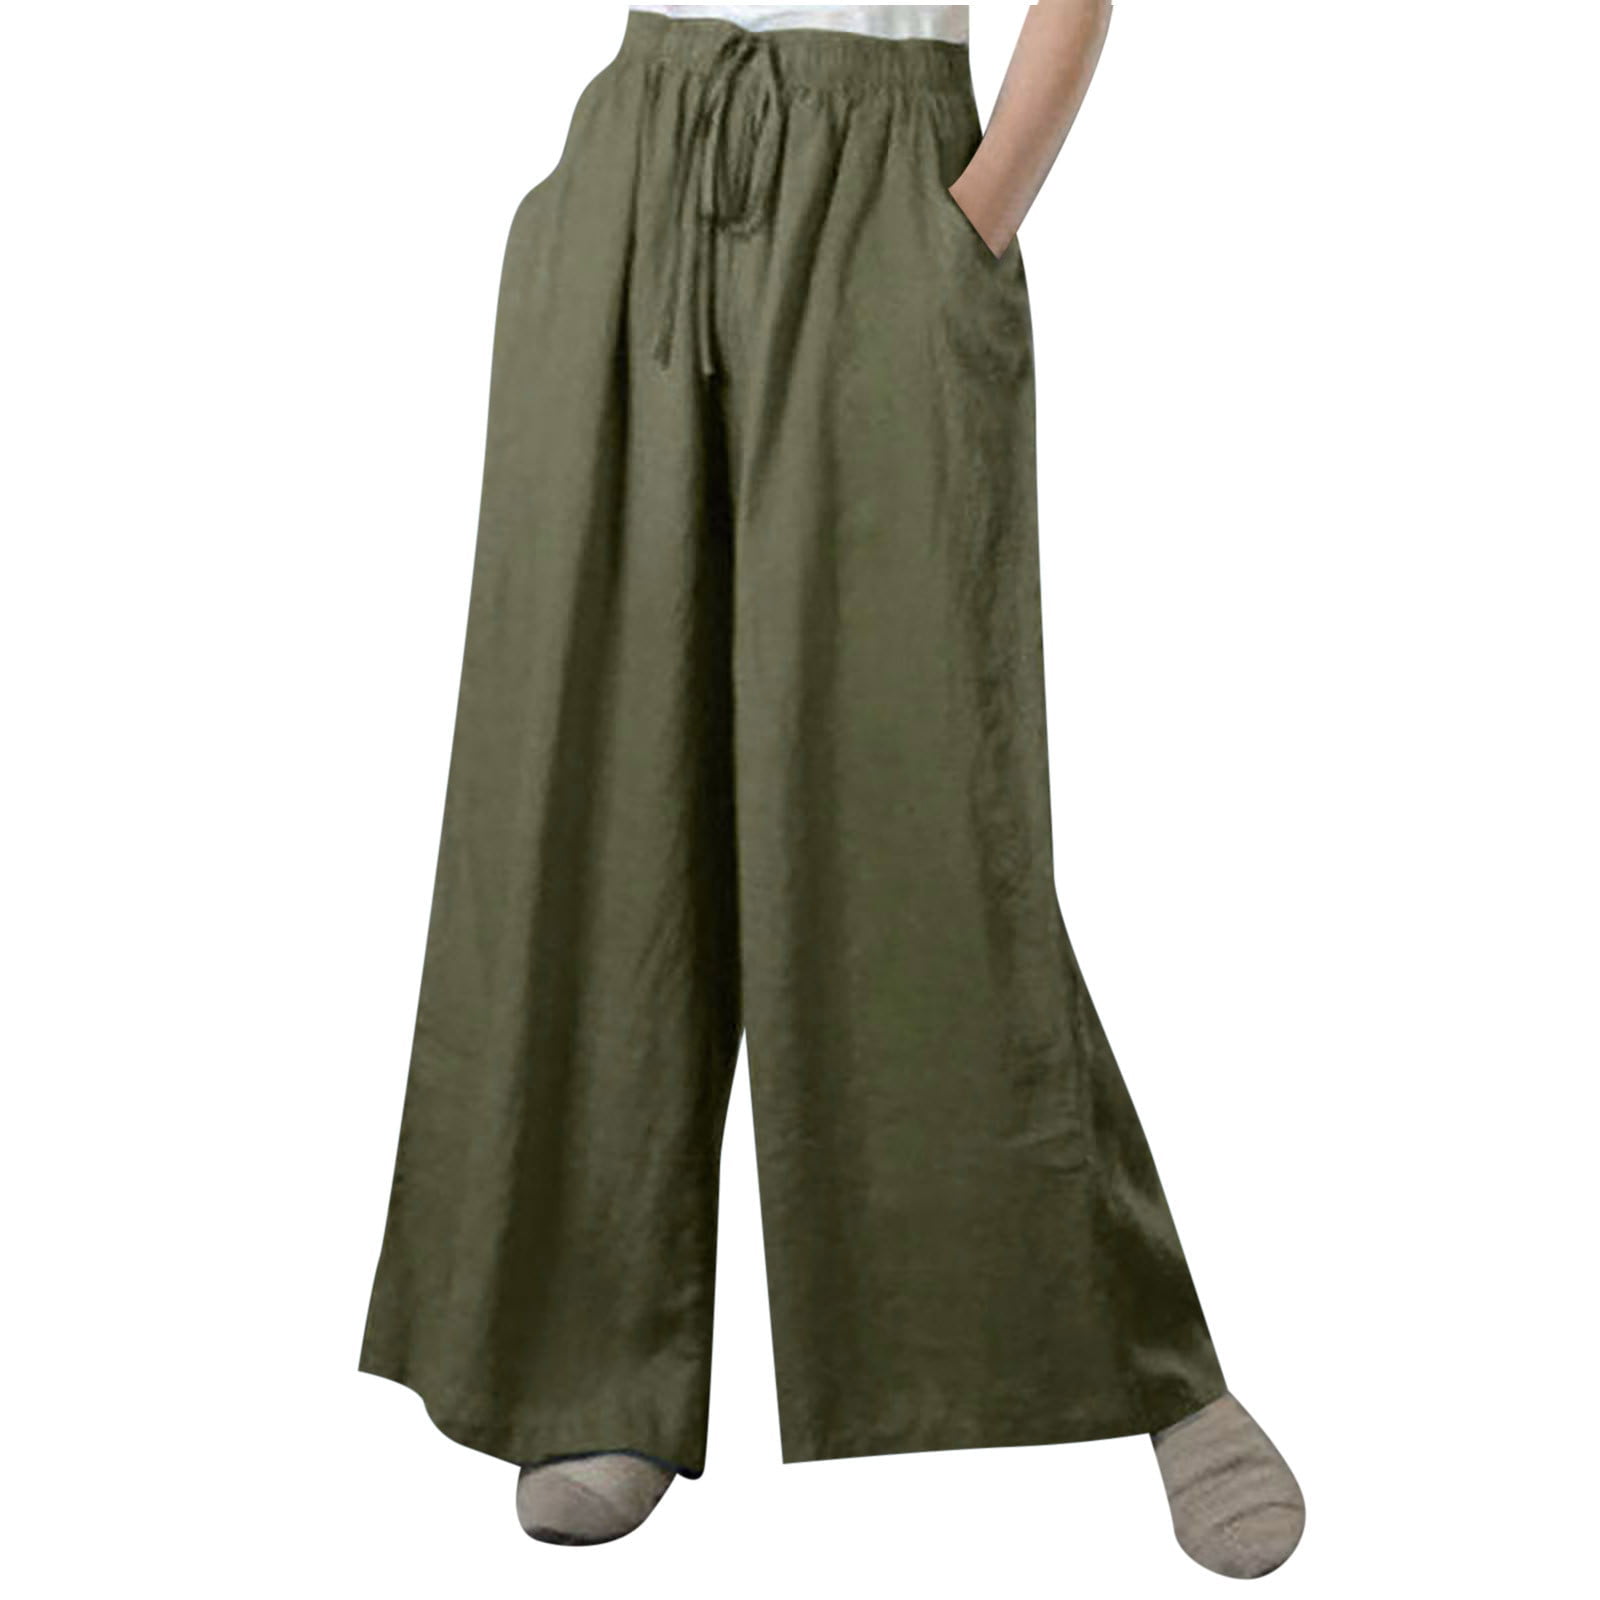 VEKDONE Overstock Items Clearance All Prime Women's Solid Cotton Linen Long  Pants Elastic High Waist Drawstring Casual Palazzos Wide Leg Comfy Baggy  Yoga Pant 